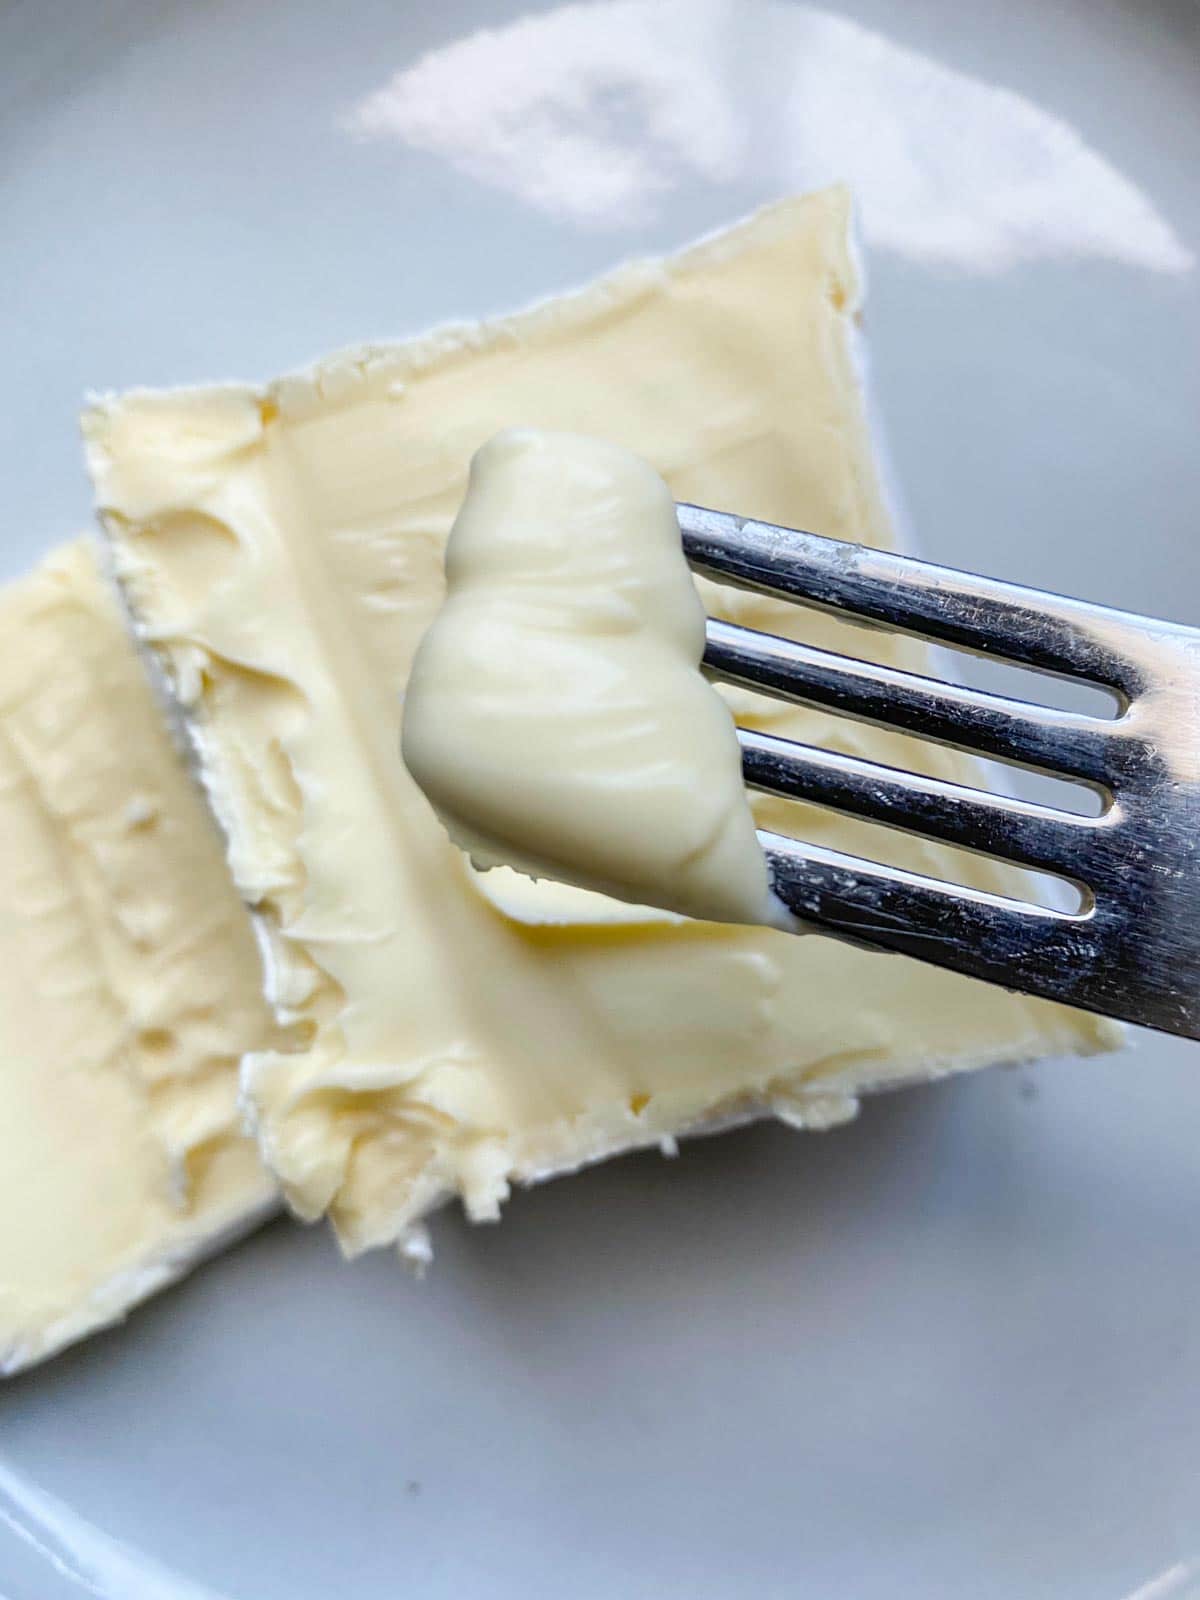 Fromage pavé cheese block from Trader Joe's cut in half with a bite on a fork